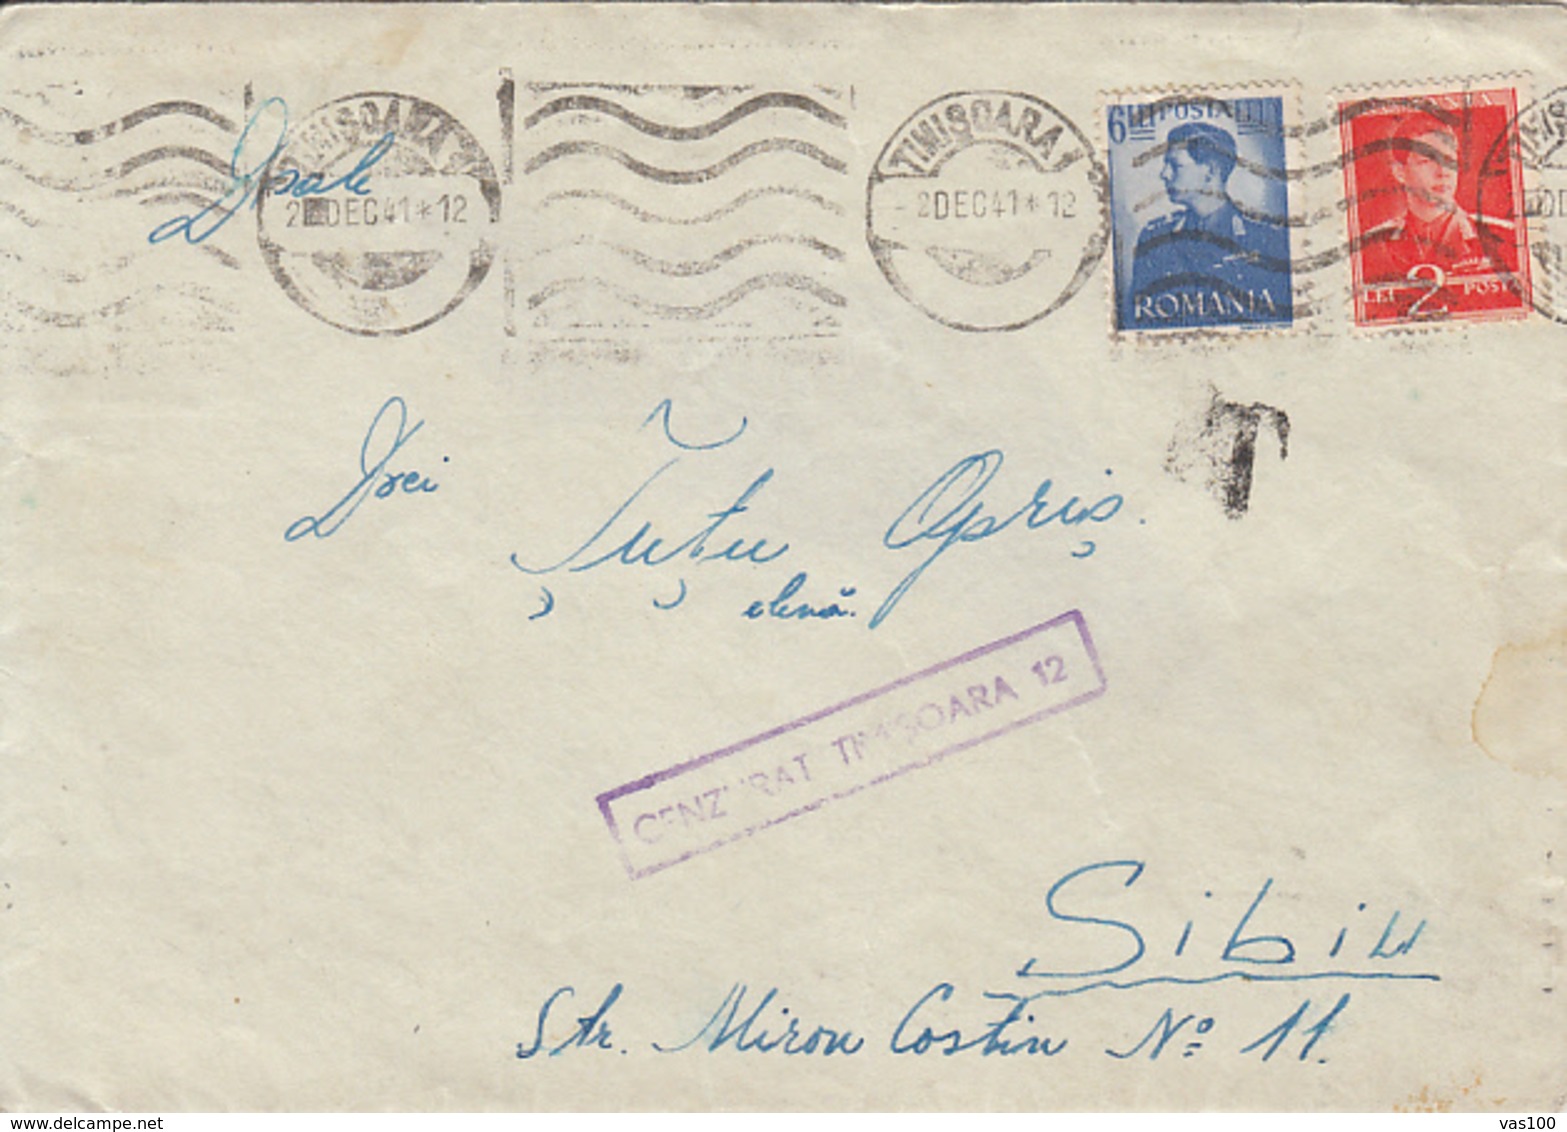 KING MICHAEL, CENSORED TIMISOARA NR 12, WW2, STAMPS ON COVER, 1941, ROMANIA - Lettres 2ème Guerre Mondiale